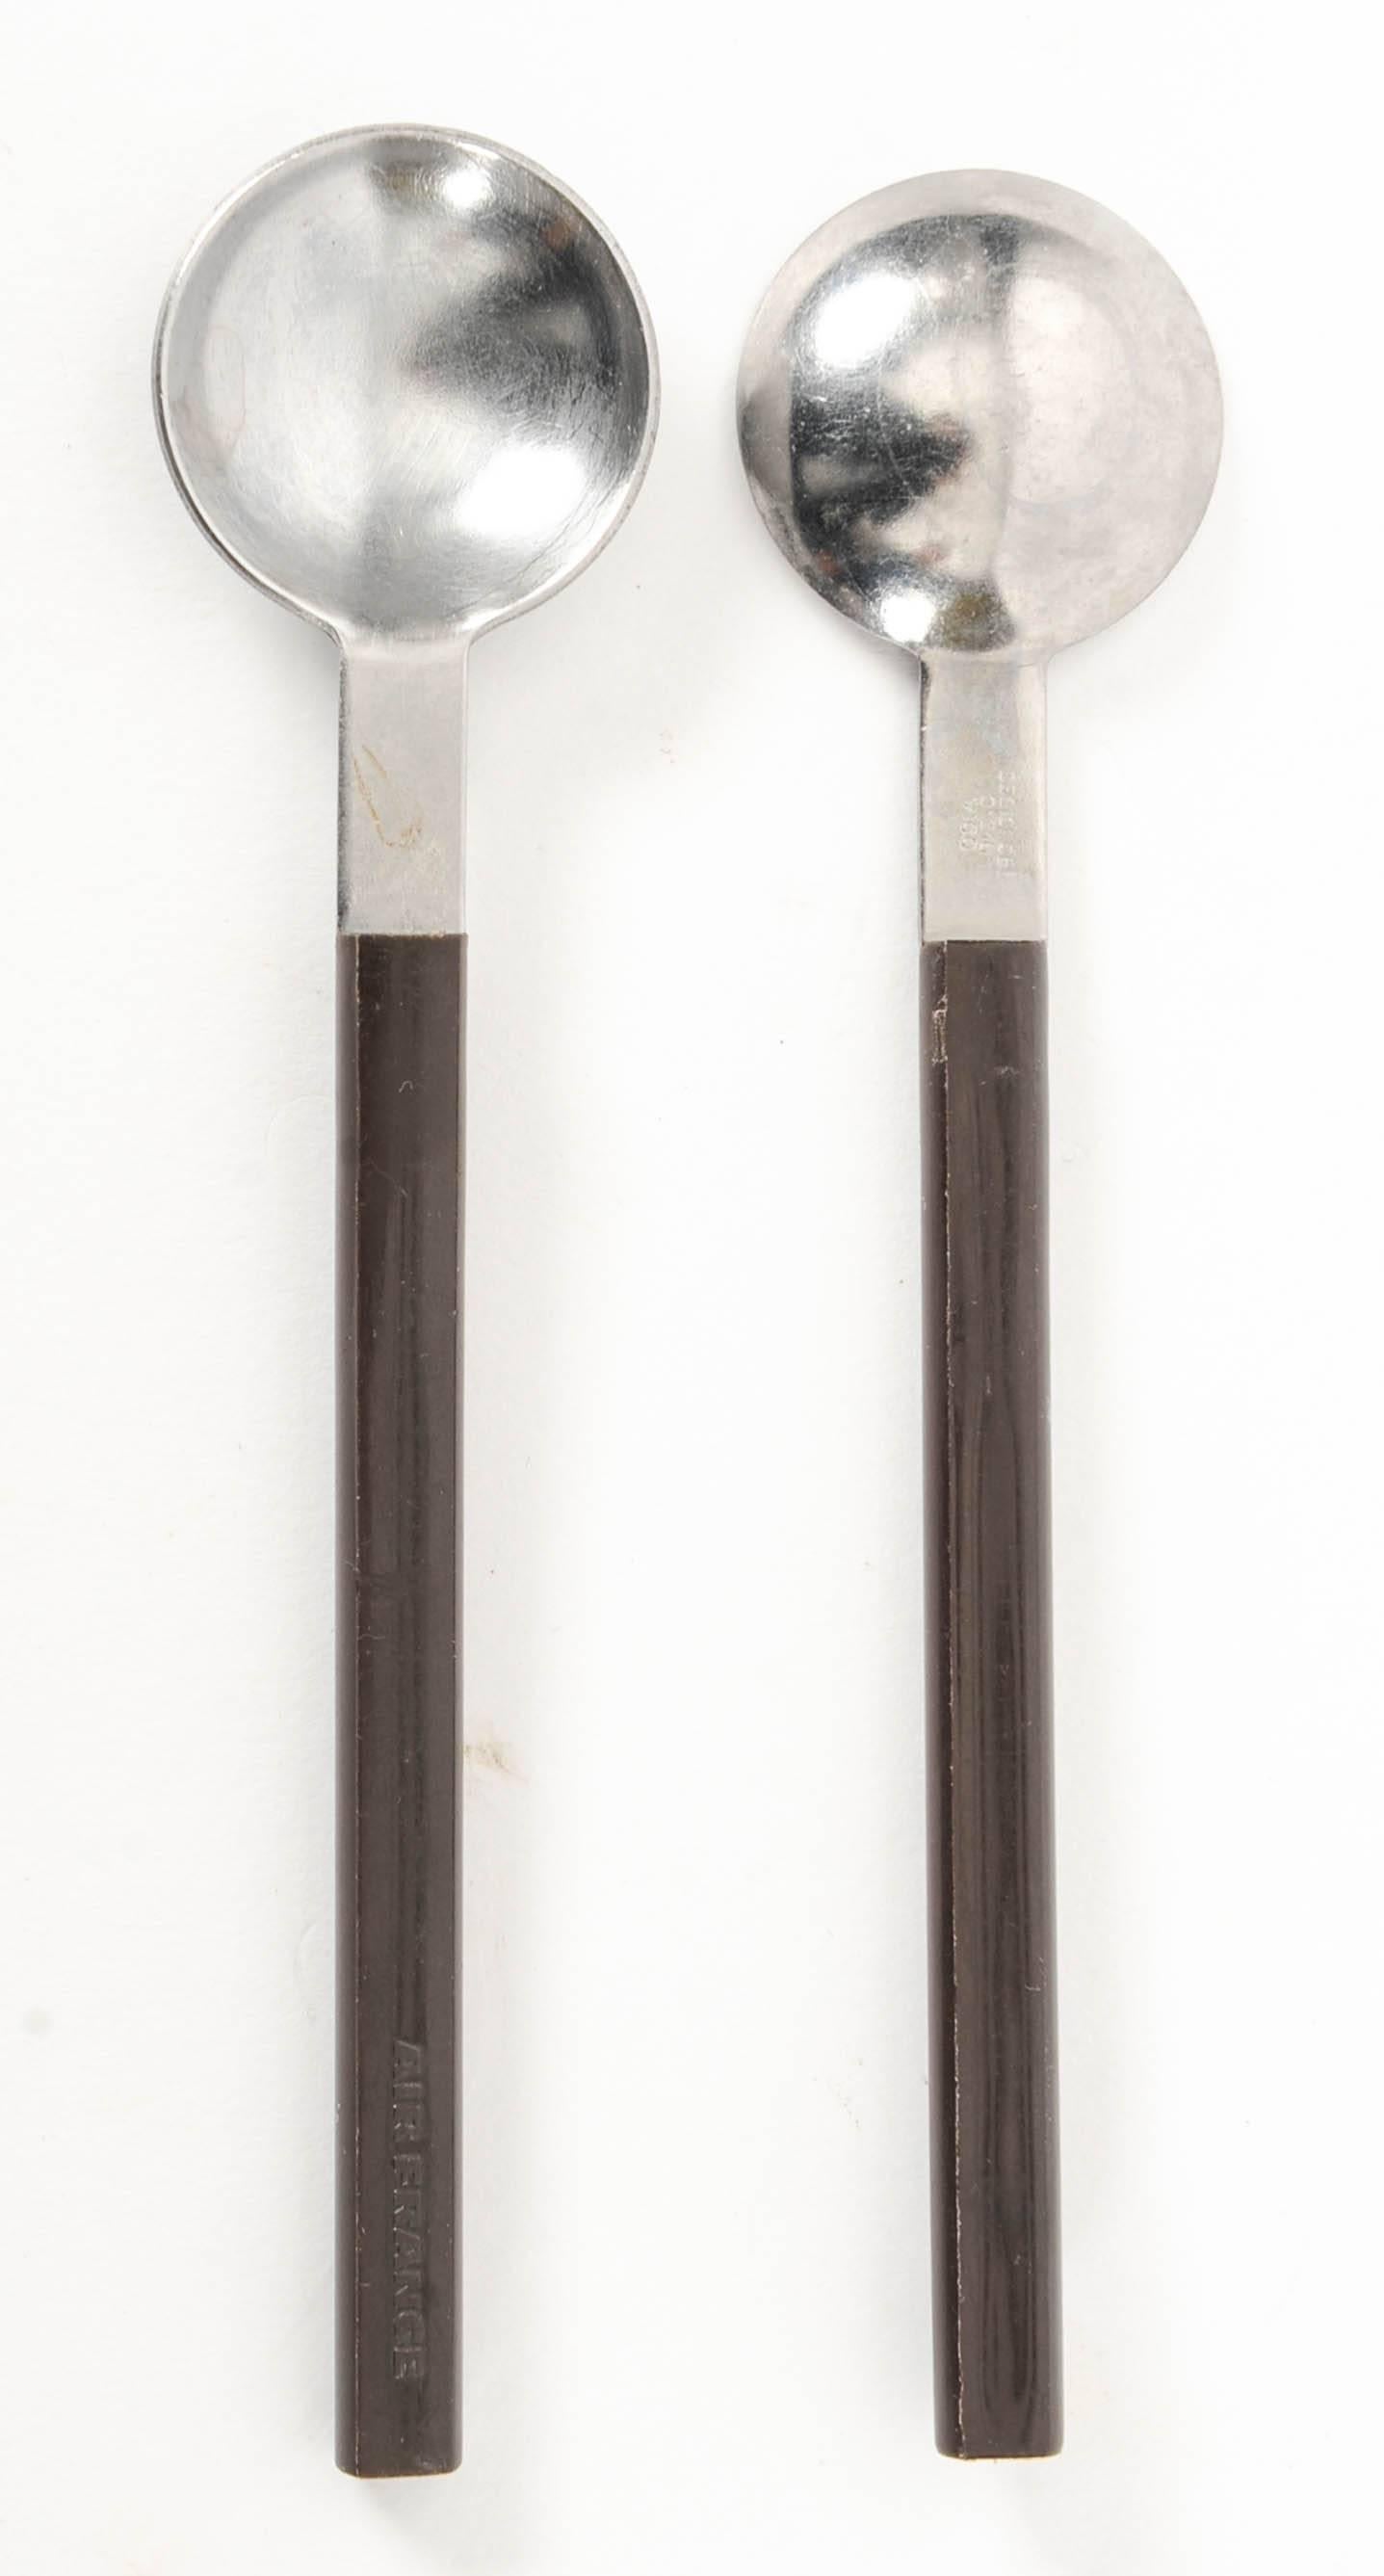 French Raymond Loewy Cutlery for Air France Concorde Service